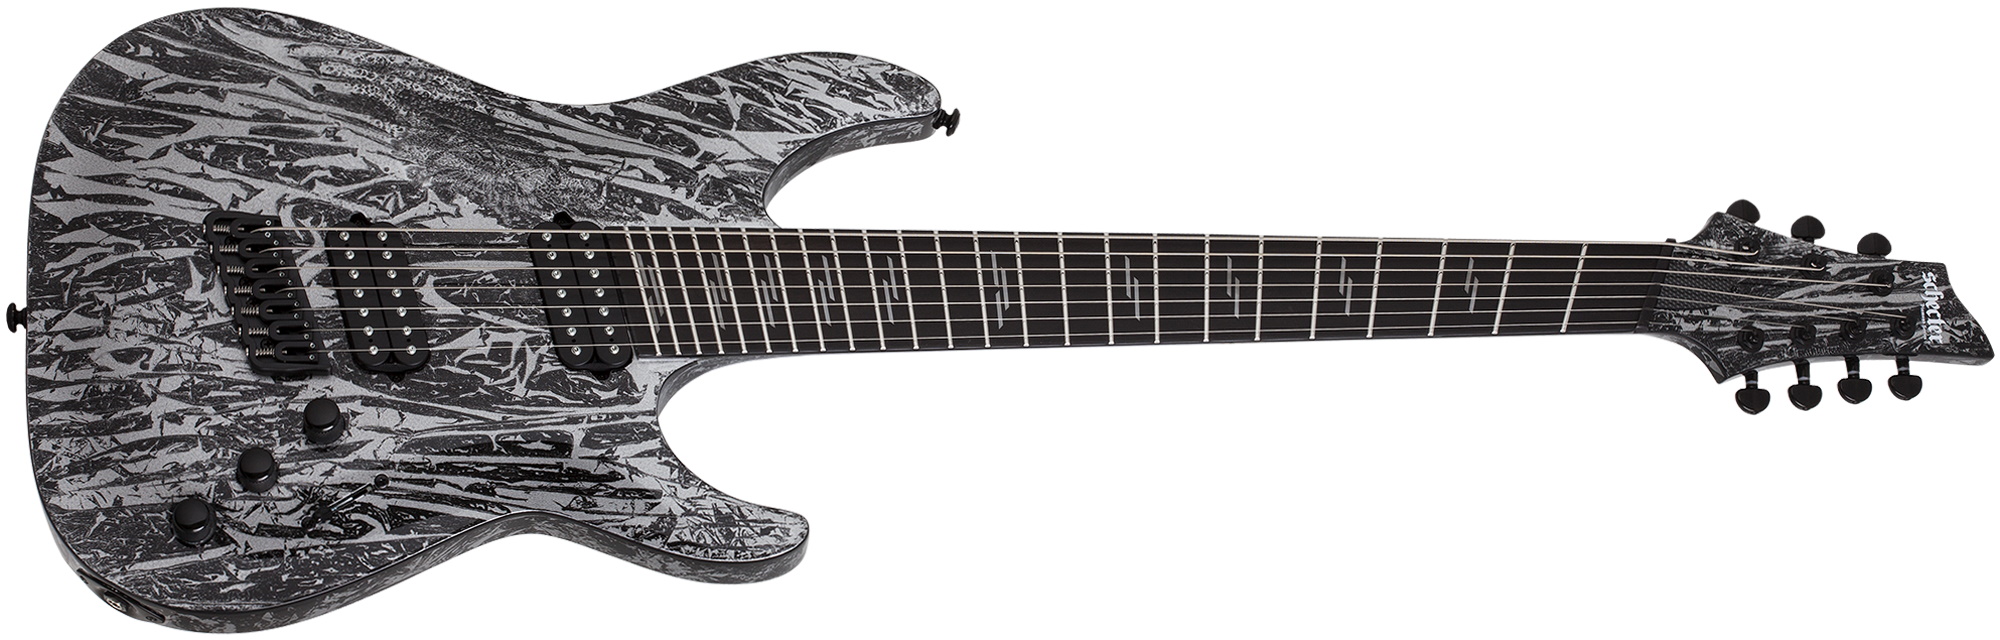 Schecter C-7 MS Silver Mountain 7-String Multiscale Electric Guitar